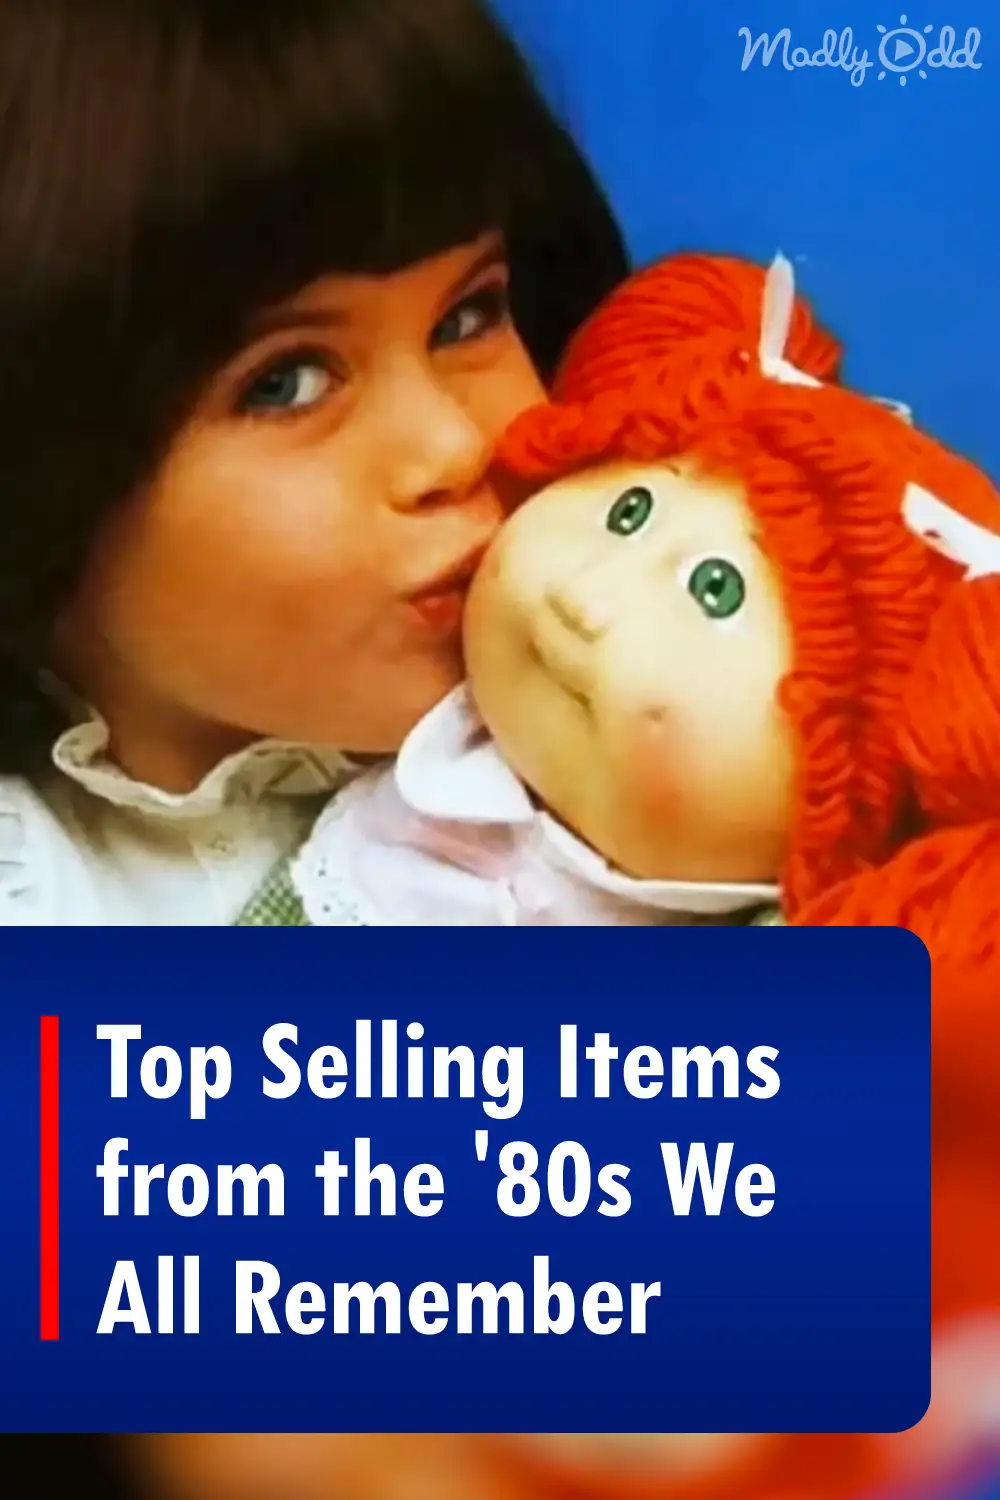 Top Selling Items from the '80s We All Remember